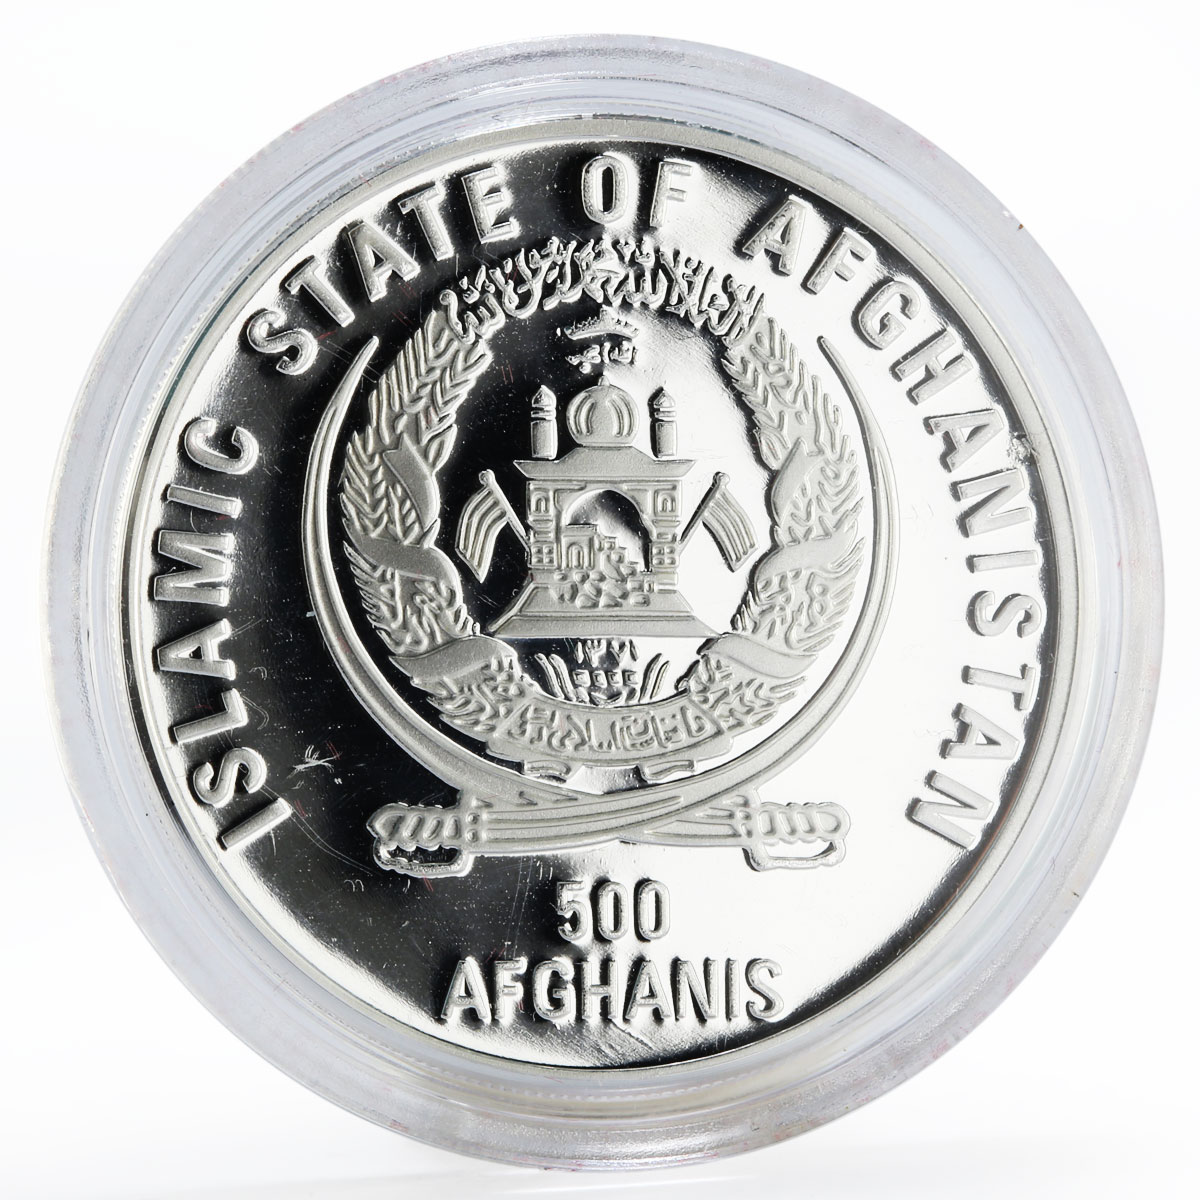 Afghanistan 500 afghanis Sydney Olimpics 2000 colored silver coin 1996